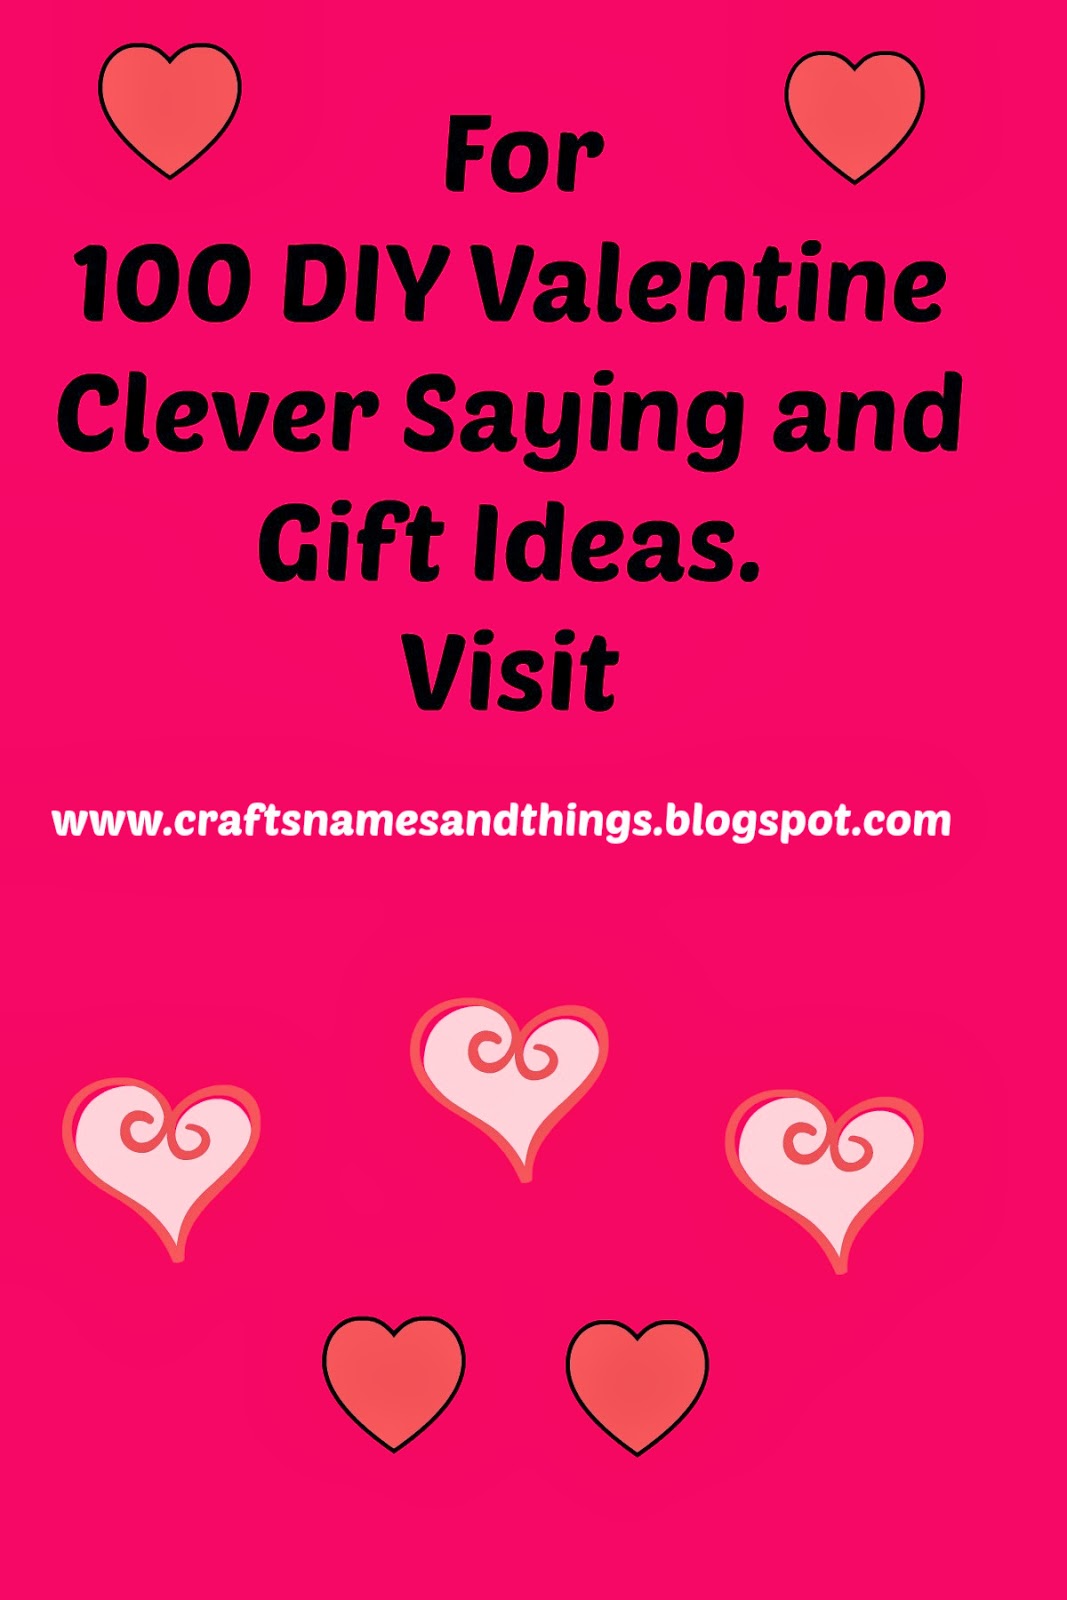 Crafts, Names, And Things!: 100 DIY Valentine Ideas and Clever Sayings: The Second 50 ...